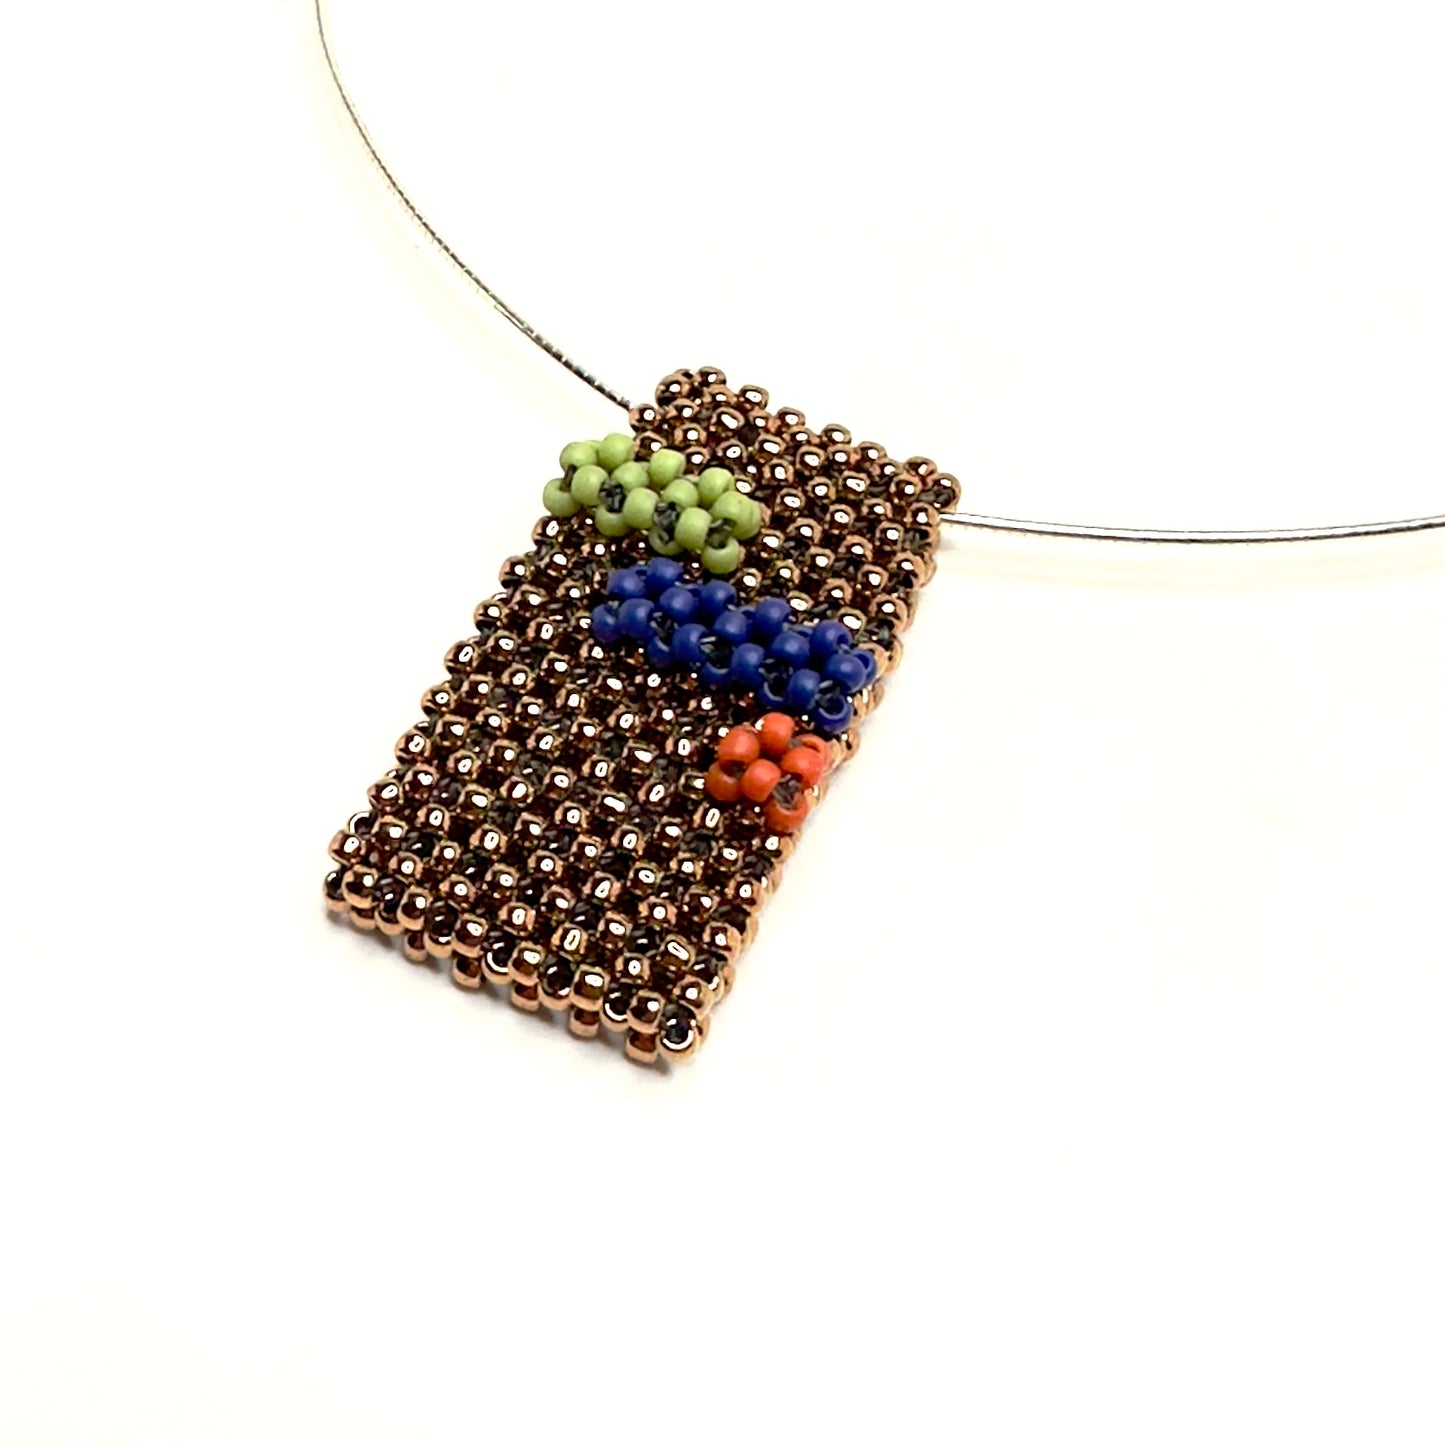 Abstract Handwoven Pendant